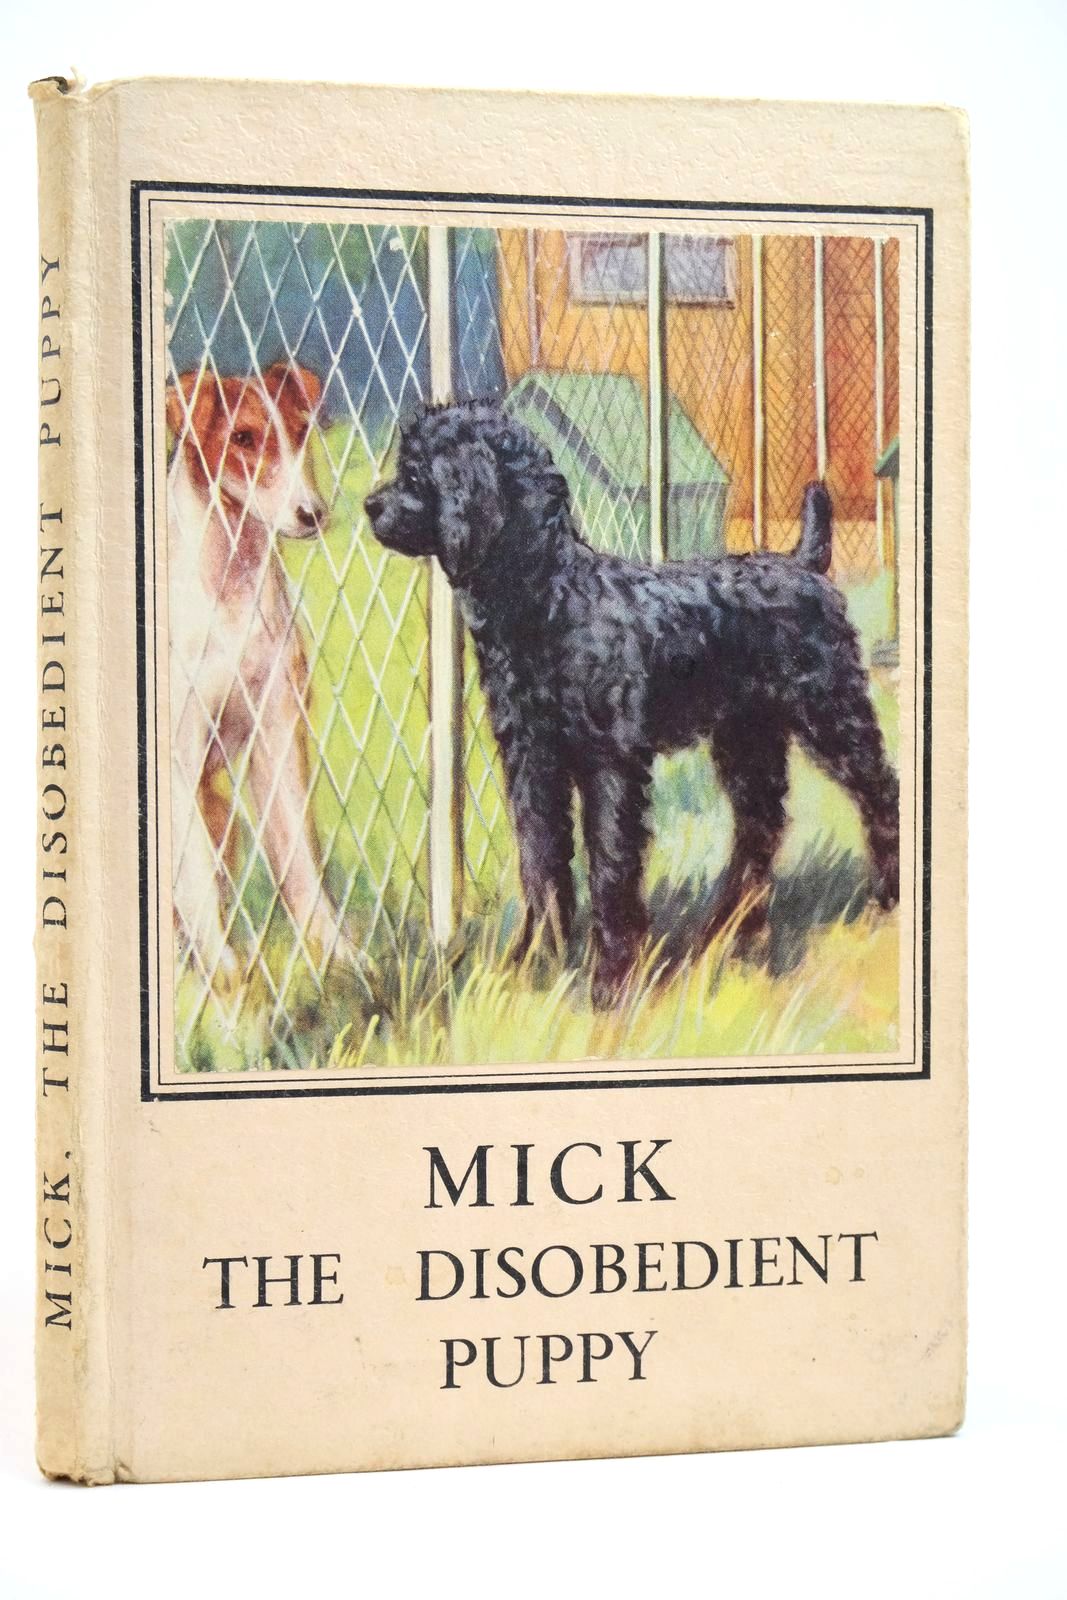 Photo of MICK THE DISOBEDIENT PUPPY- Stock Number: 2135156